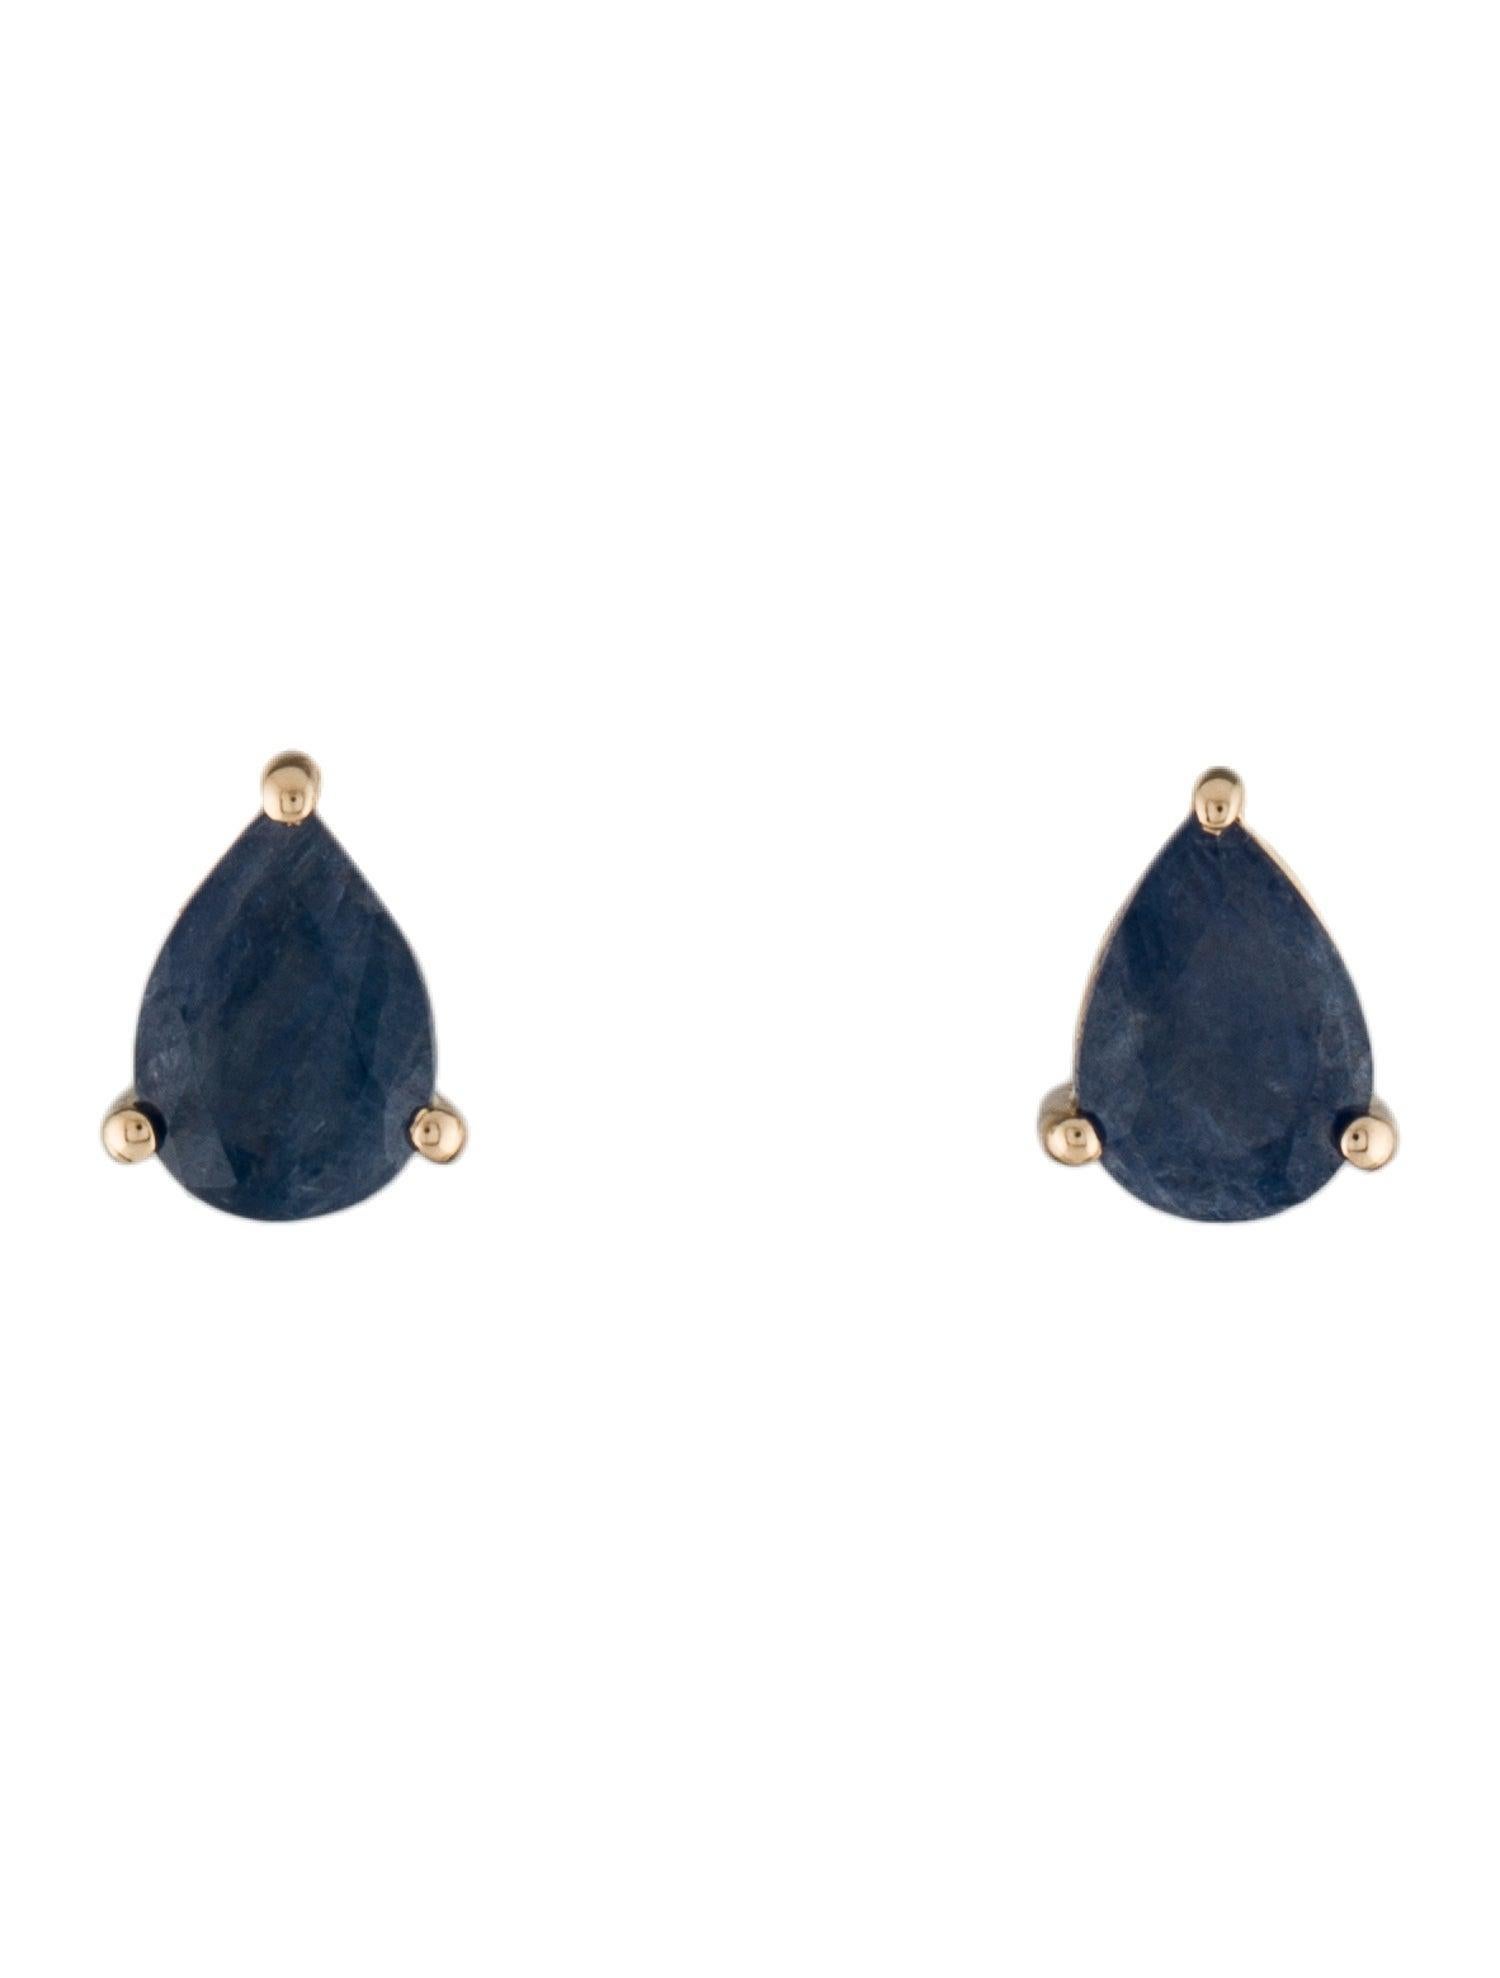 Introducing our striking pair of Sapphire Stud Earrings, a testament to timeless elegance and sophistication. Crafted from lustrous 14K Yellow Gold, these earrings are designed to captivate with their deep blue, pear-shaped sapphires, totaling 1.52